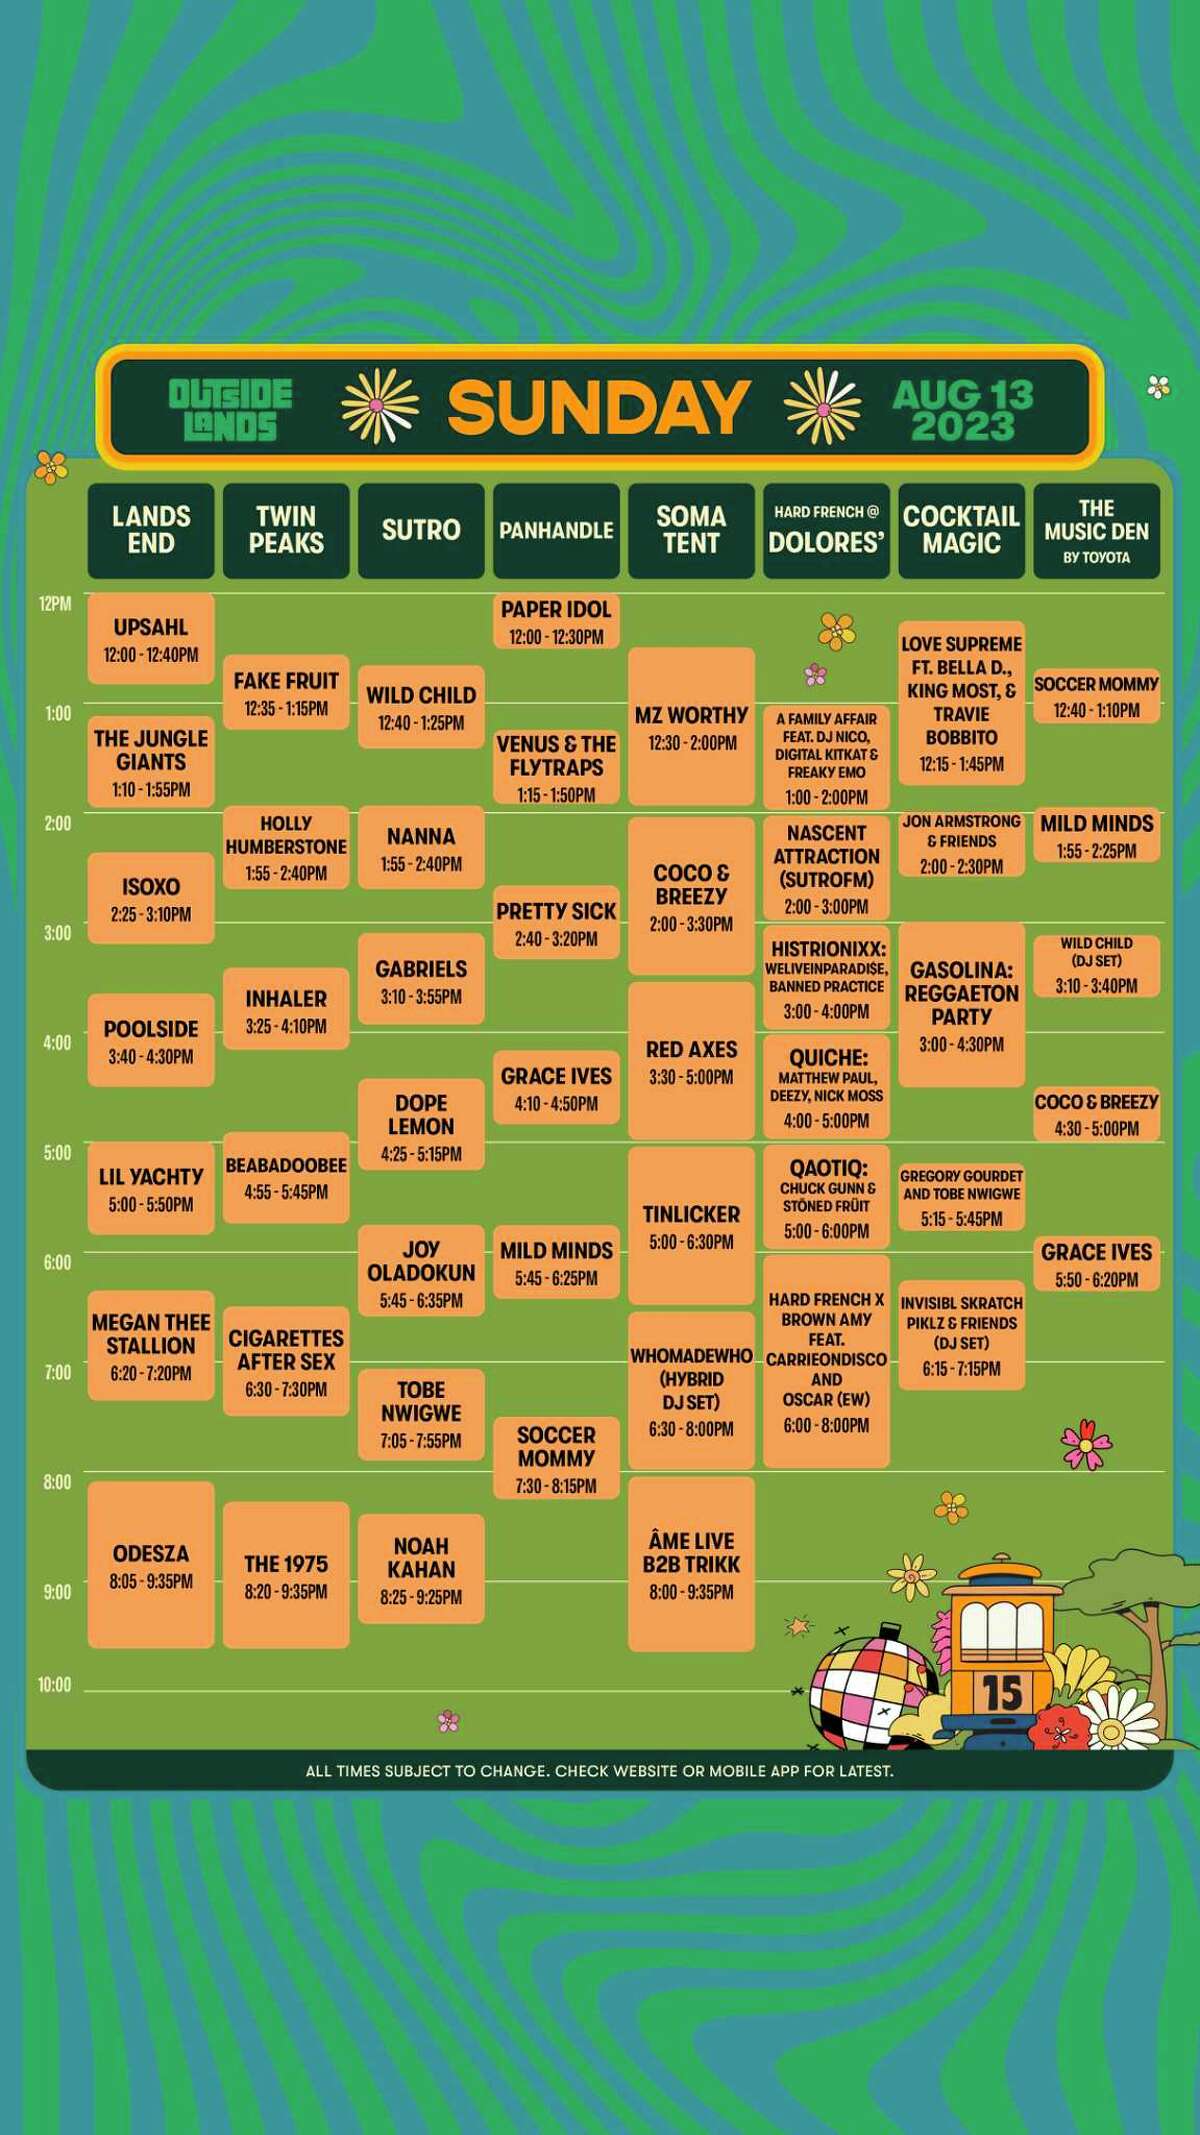 Outside Lands 2023 Guide to the lineup, merch and parking